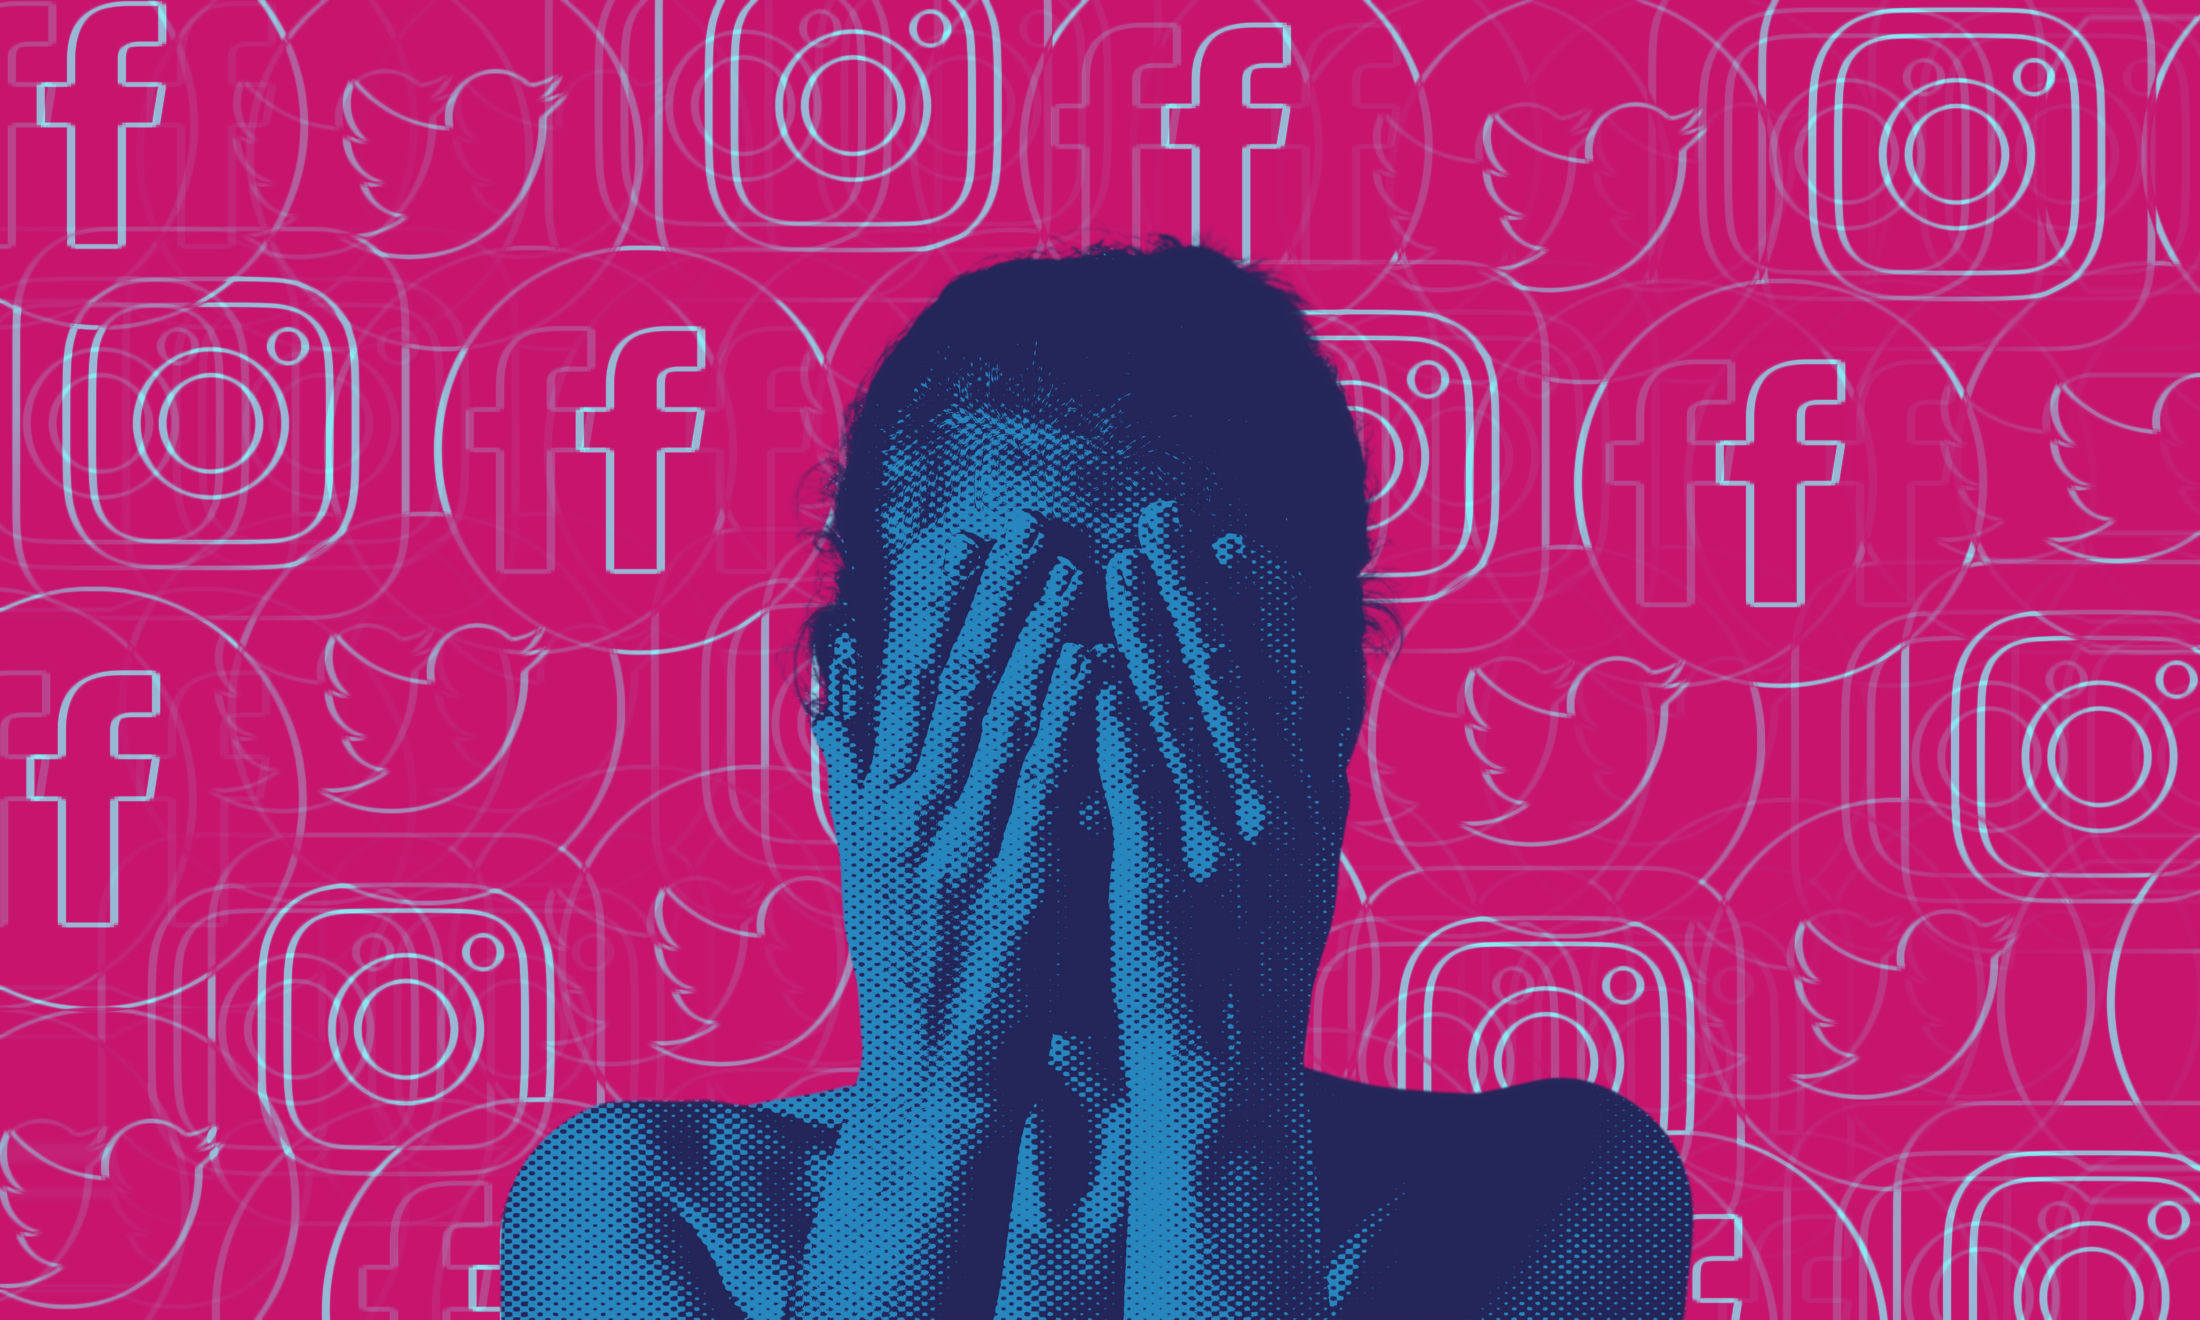 Social media thrives on shame – but how should we handle an offensive past coming to light?